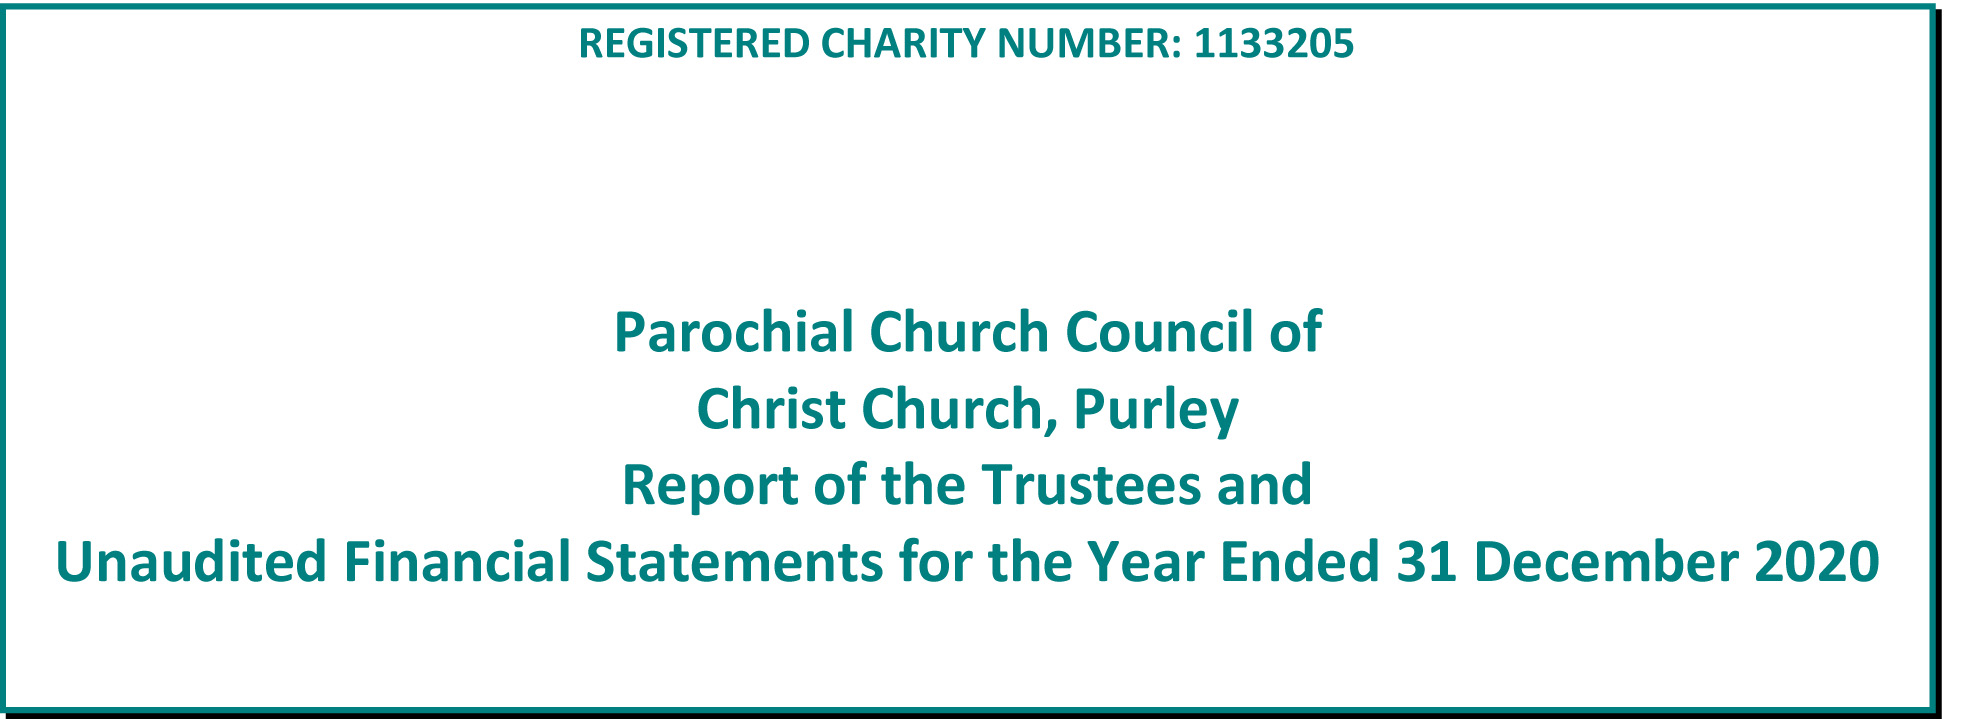 REGISTERED CHARITY NUMBER